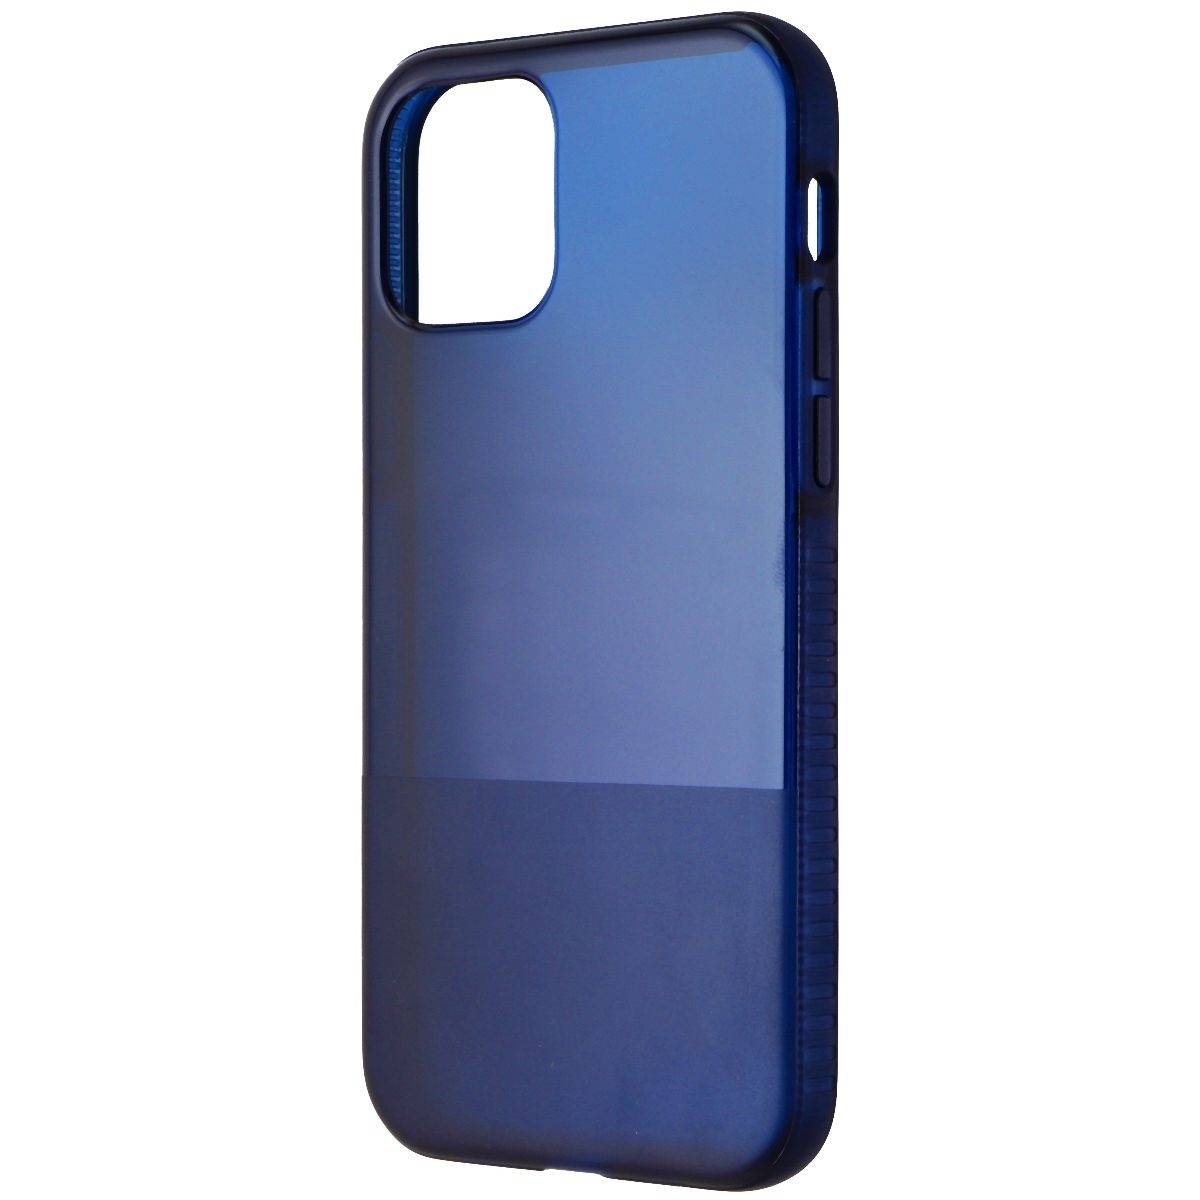 BodyGuardz Stack Series Case For Apple IPhone 12/iPhone 12 Pro - Navy Blue (Refurbished)